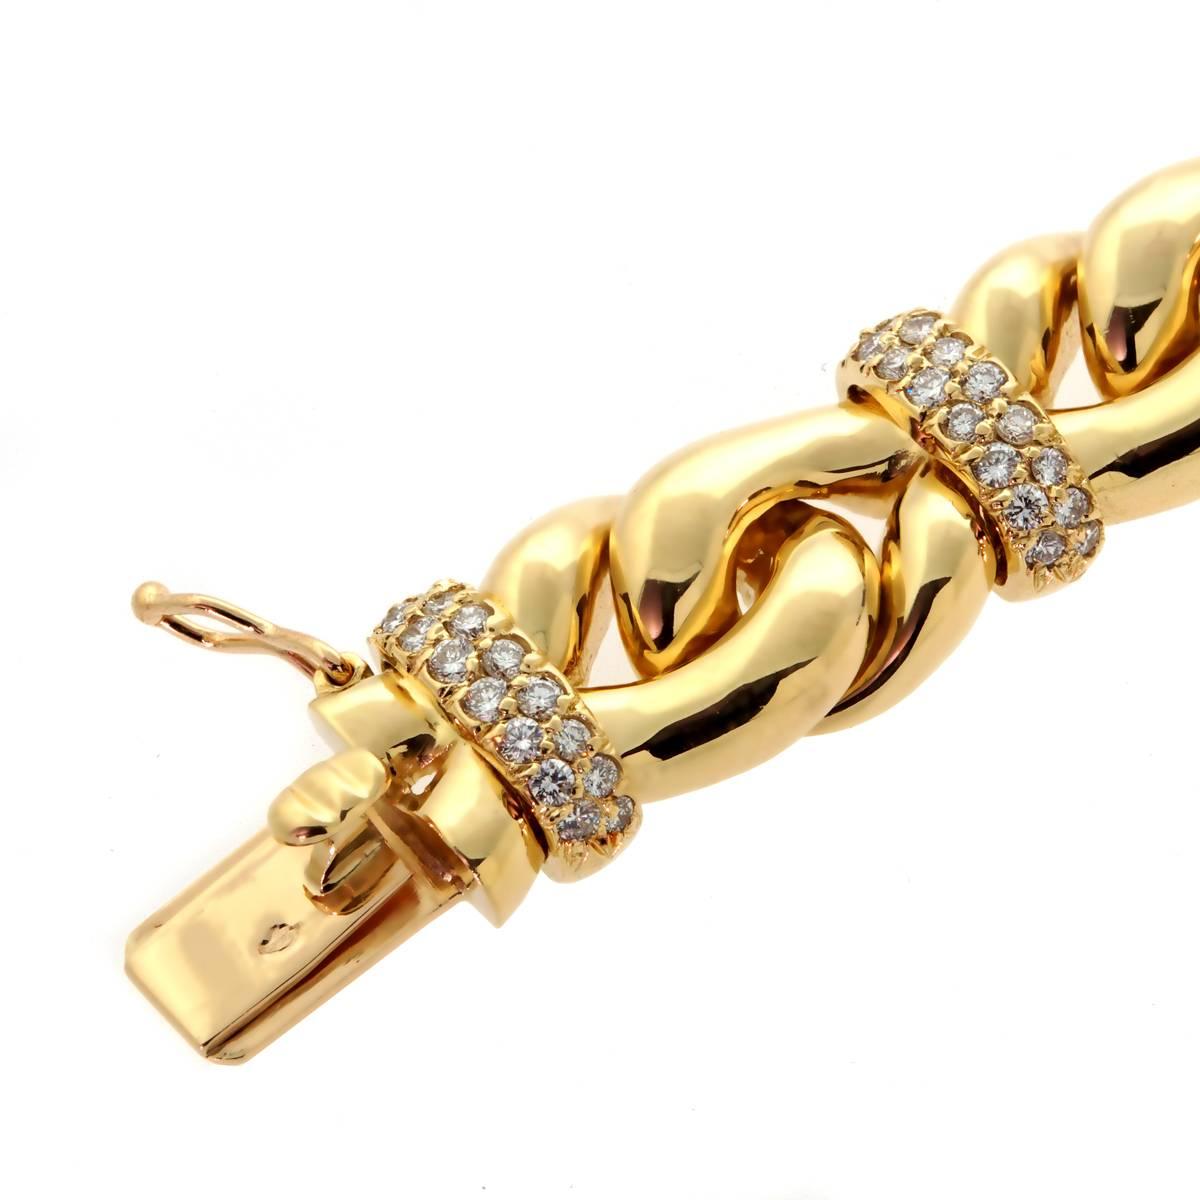 A fabulous vintage Boucheron chain link bracelet adorned with 144 of the finest round brilliant cut diamonds (2.16ct) set in 18k yellow gold. 

Length: 7", Width: .51" Weight: 59.3 grams

This magnificent piece is offered by Opulent